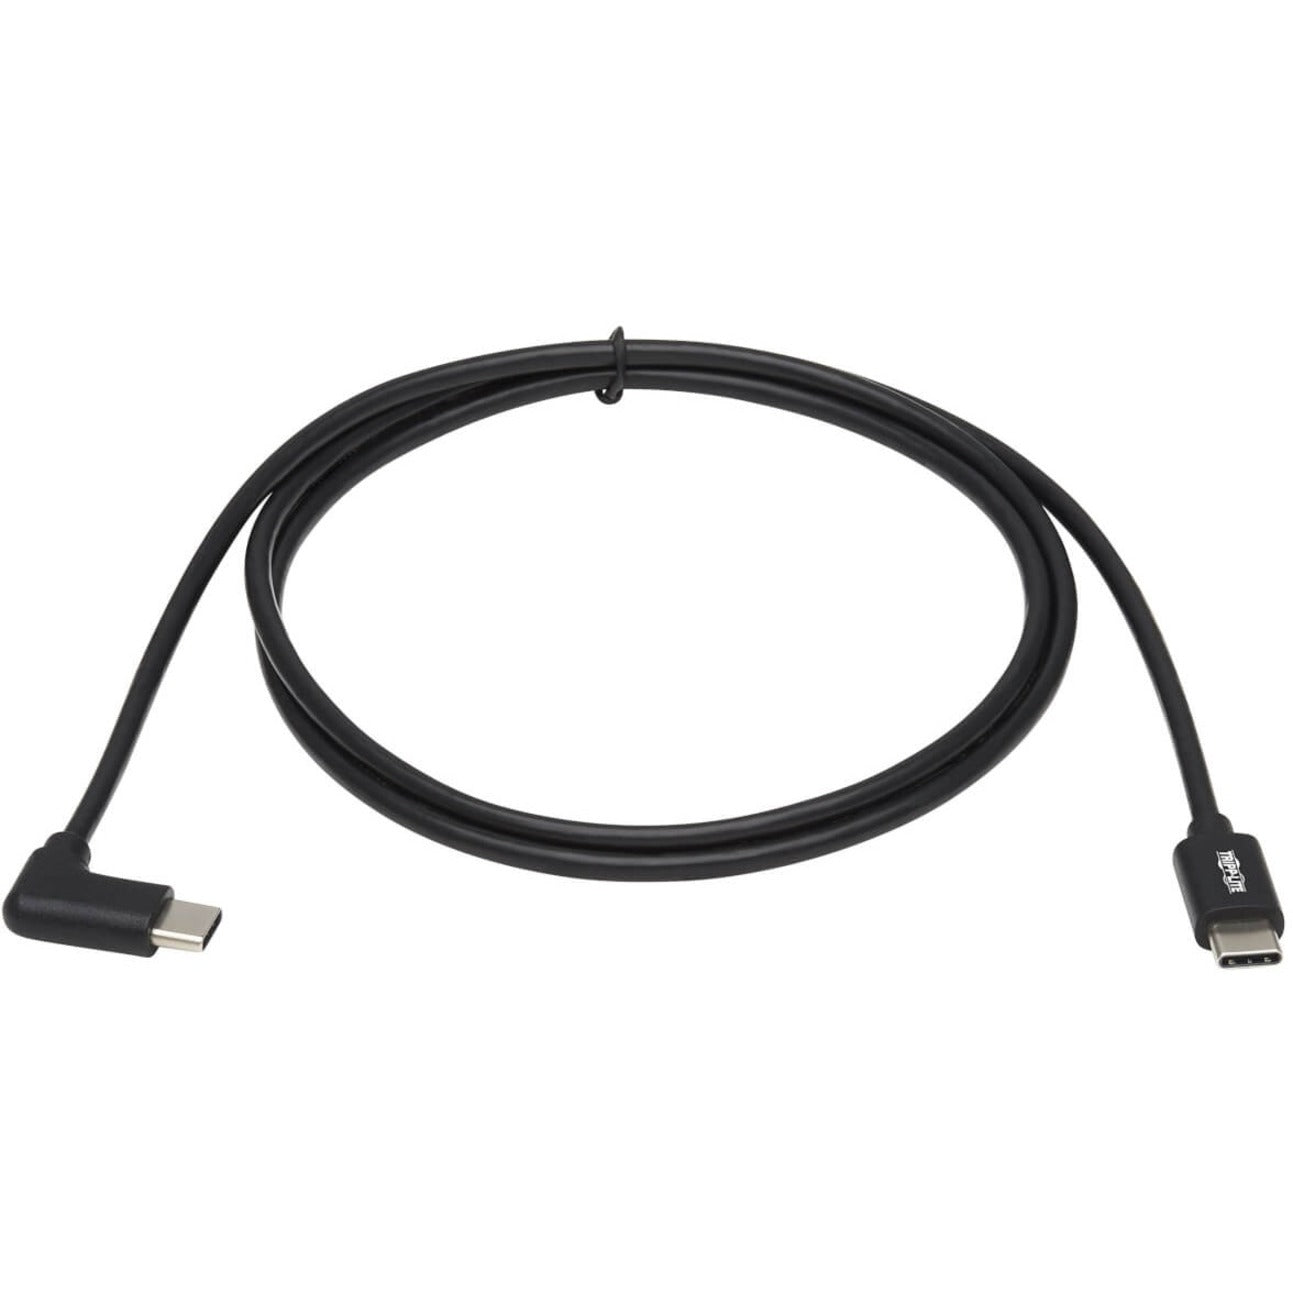 Tripp Lite U040-01M-C-RA USB-C to USB-C Cable, M/M, Black, 1 m (3.3 ft.), Right-Angled Connector, Reversible, USB-Power Delivery (USB PD), Charging